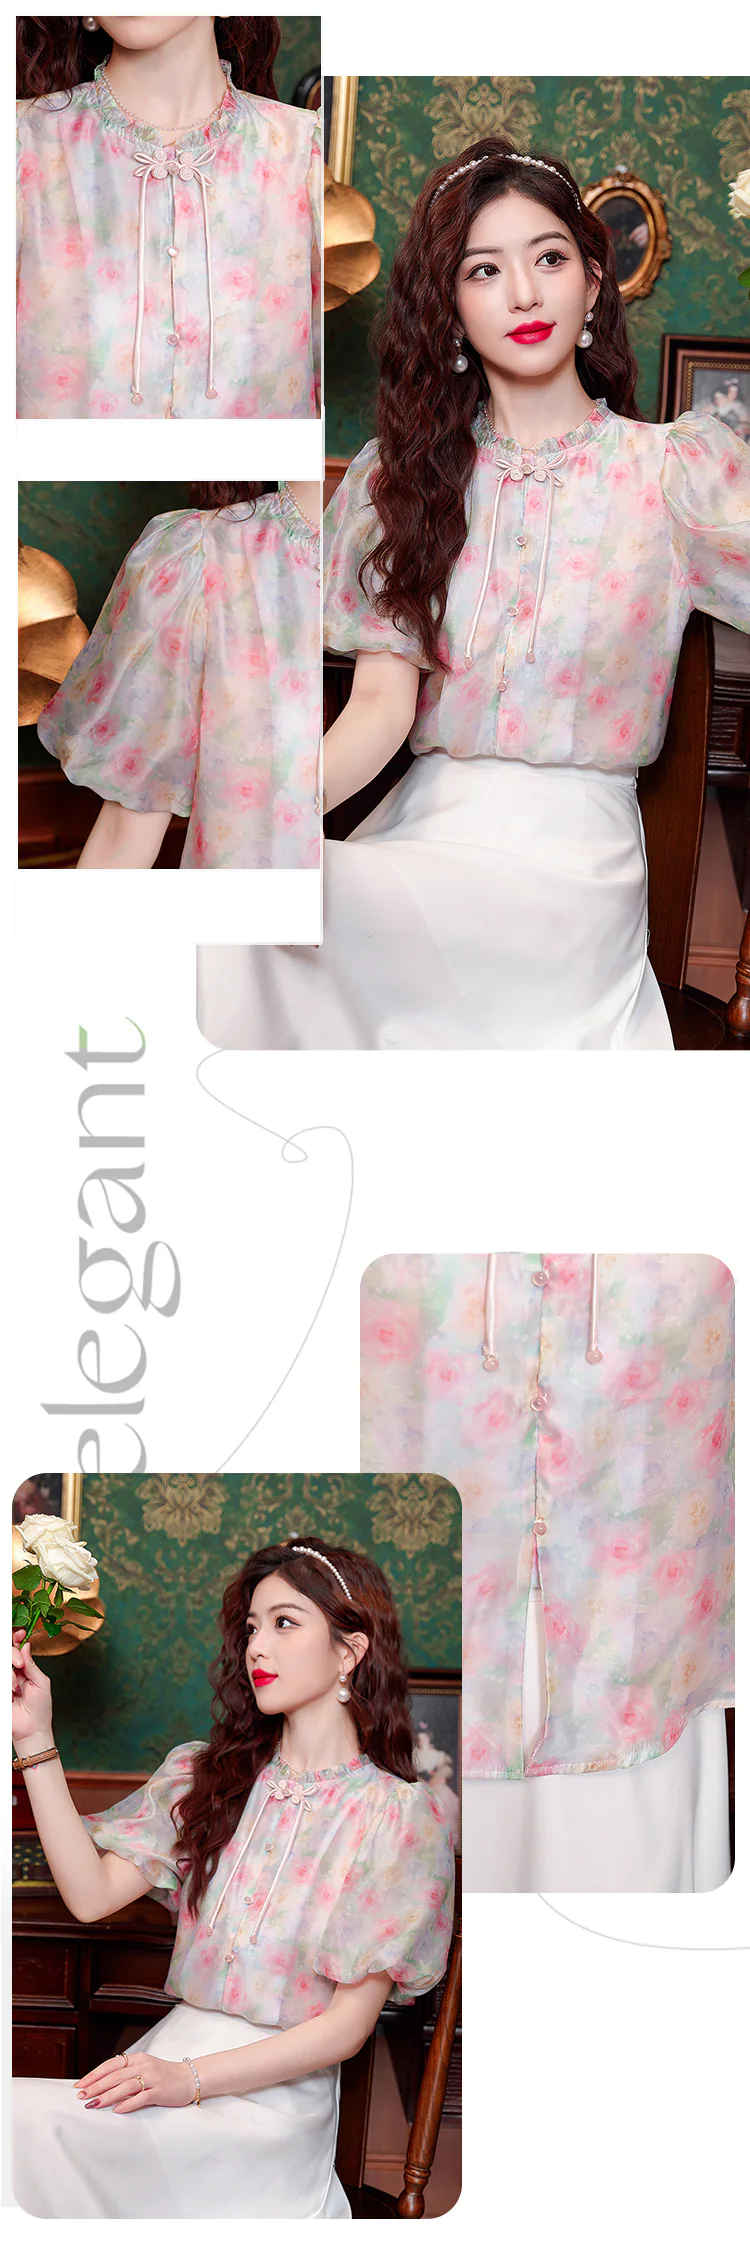 Sweet-Ladies-Summer-Casual-Floral-Chiffon-Shirt-with-Short-Puff-Sleeves10